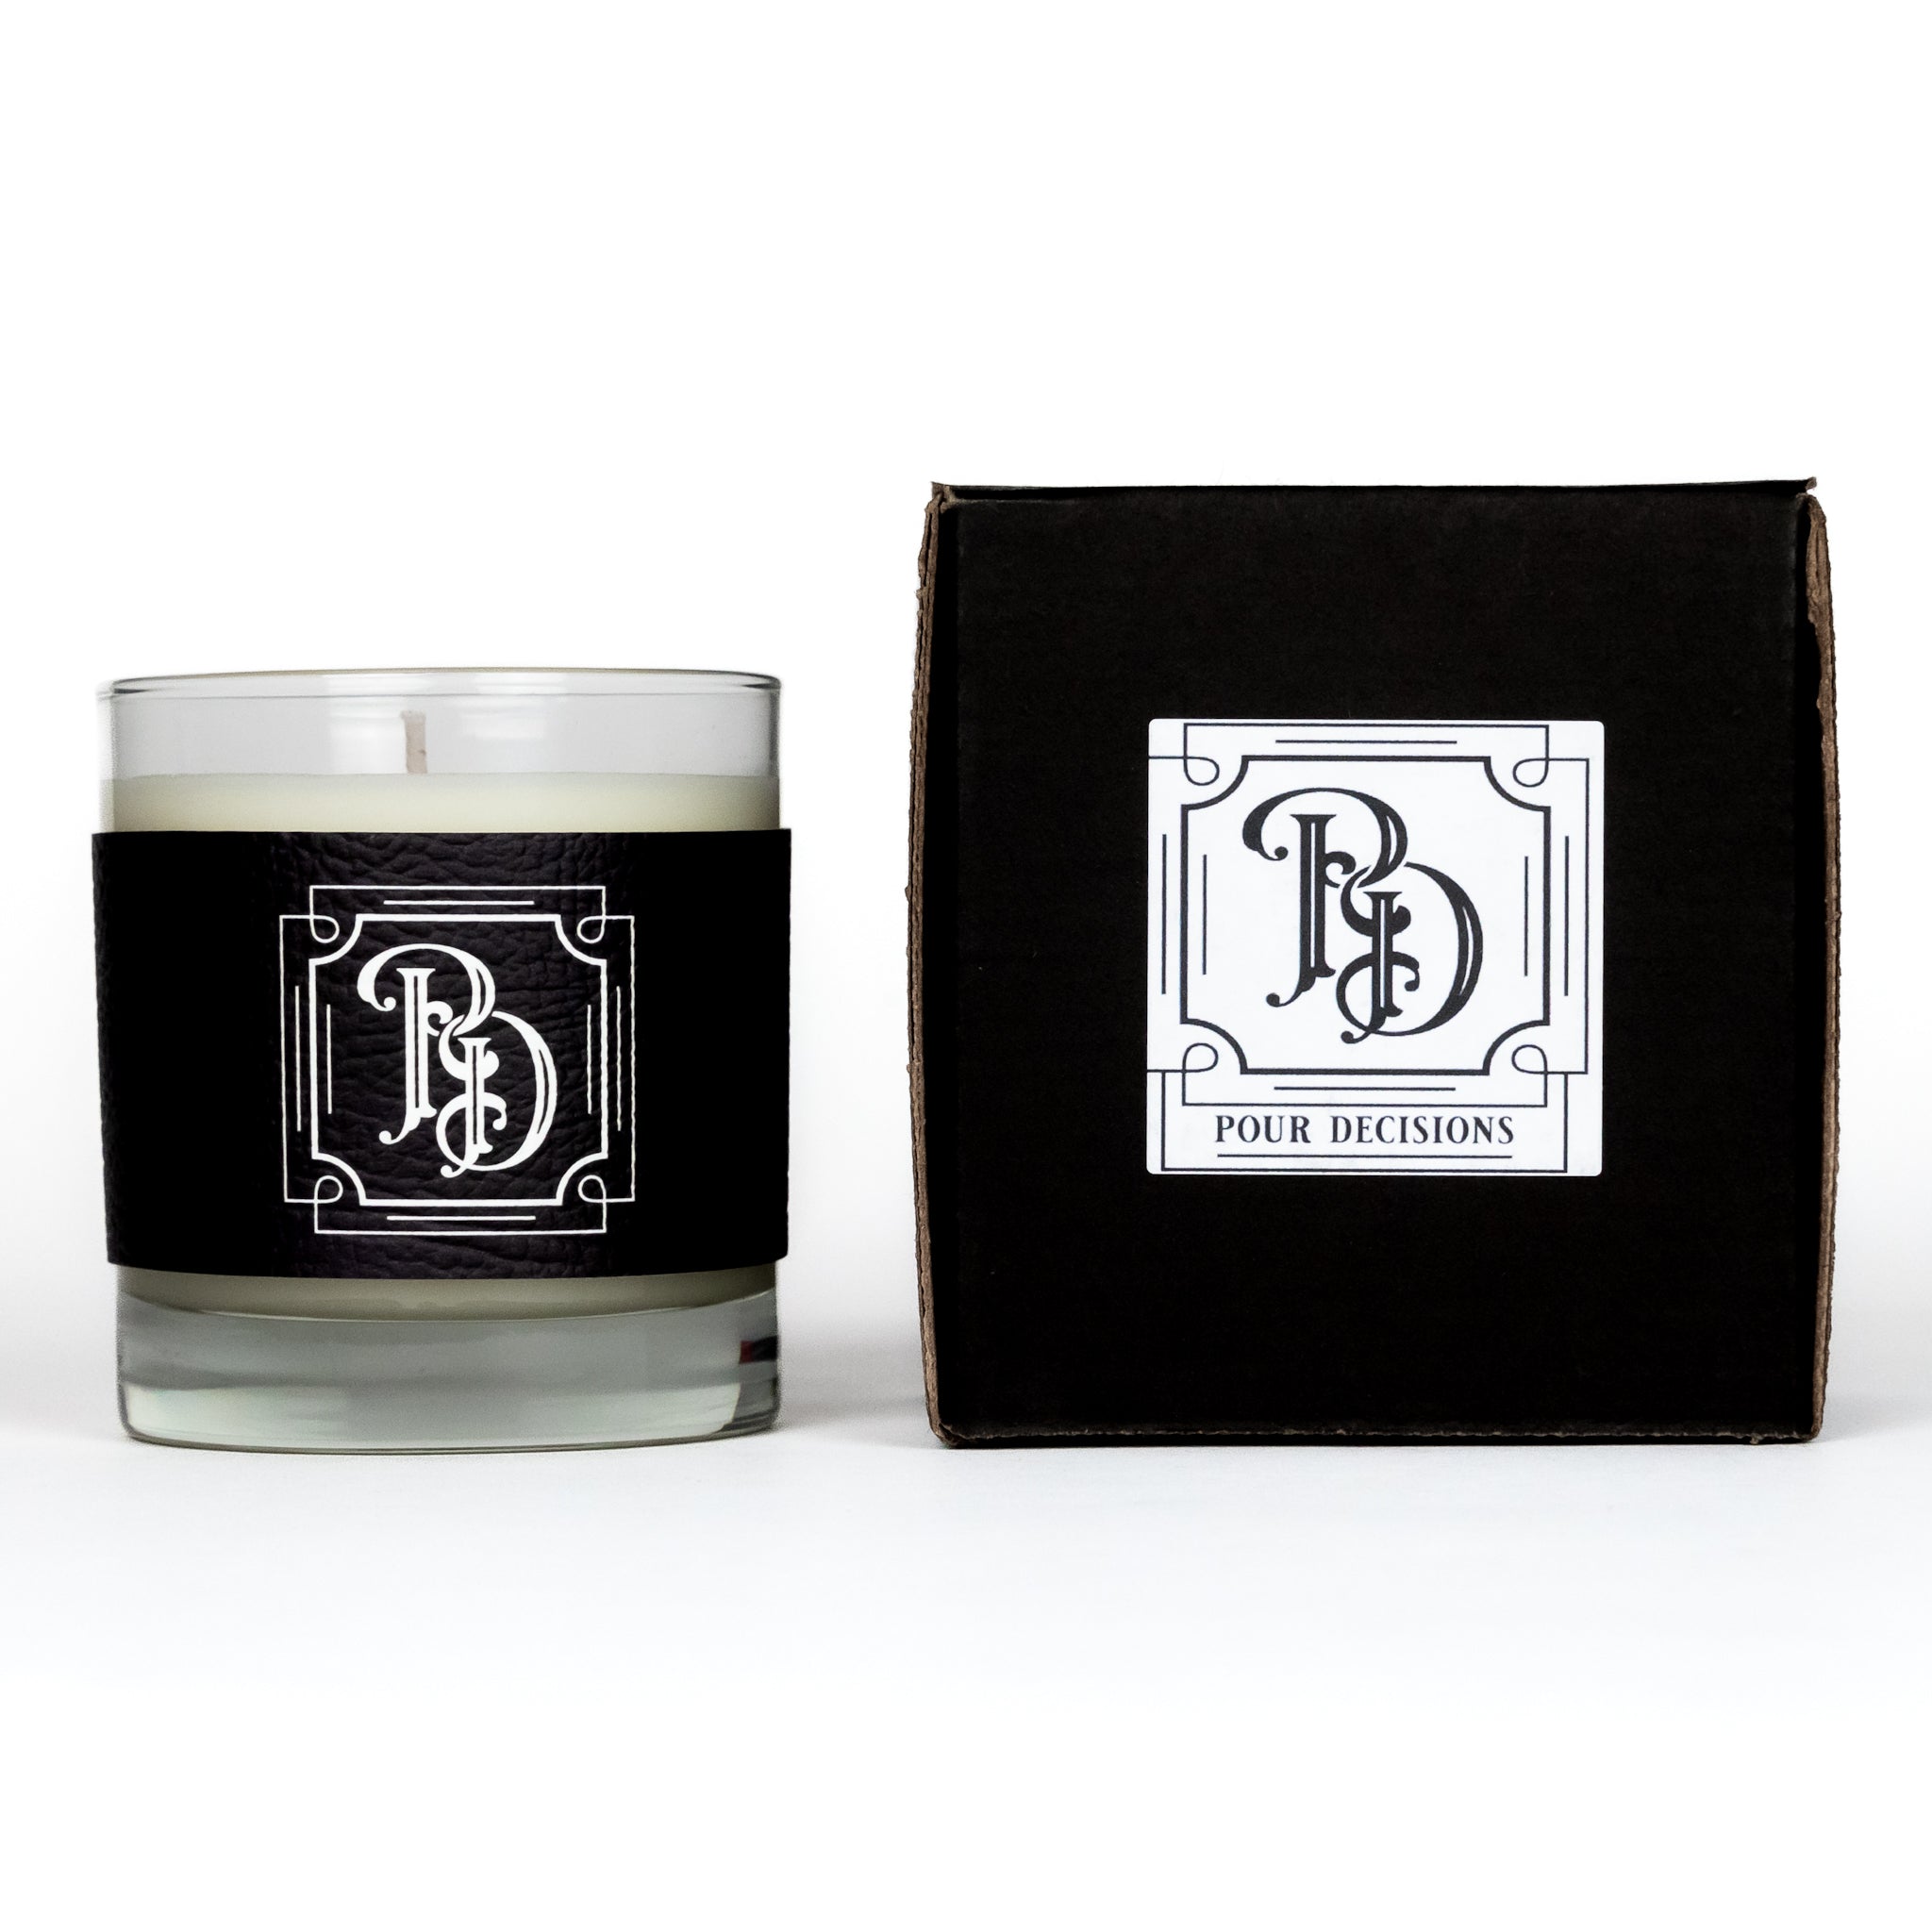 Mojito Soy Candle